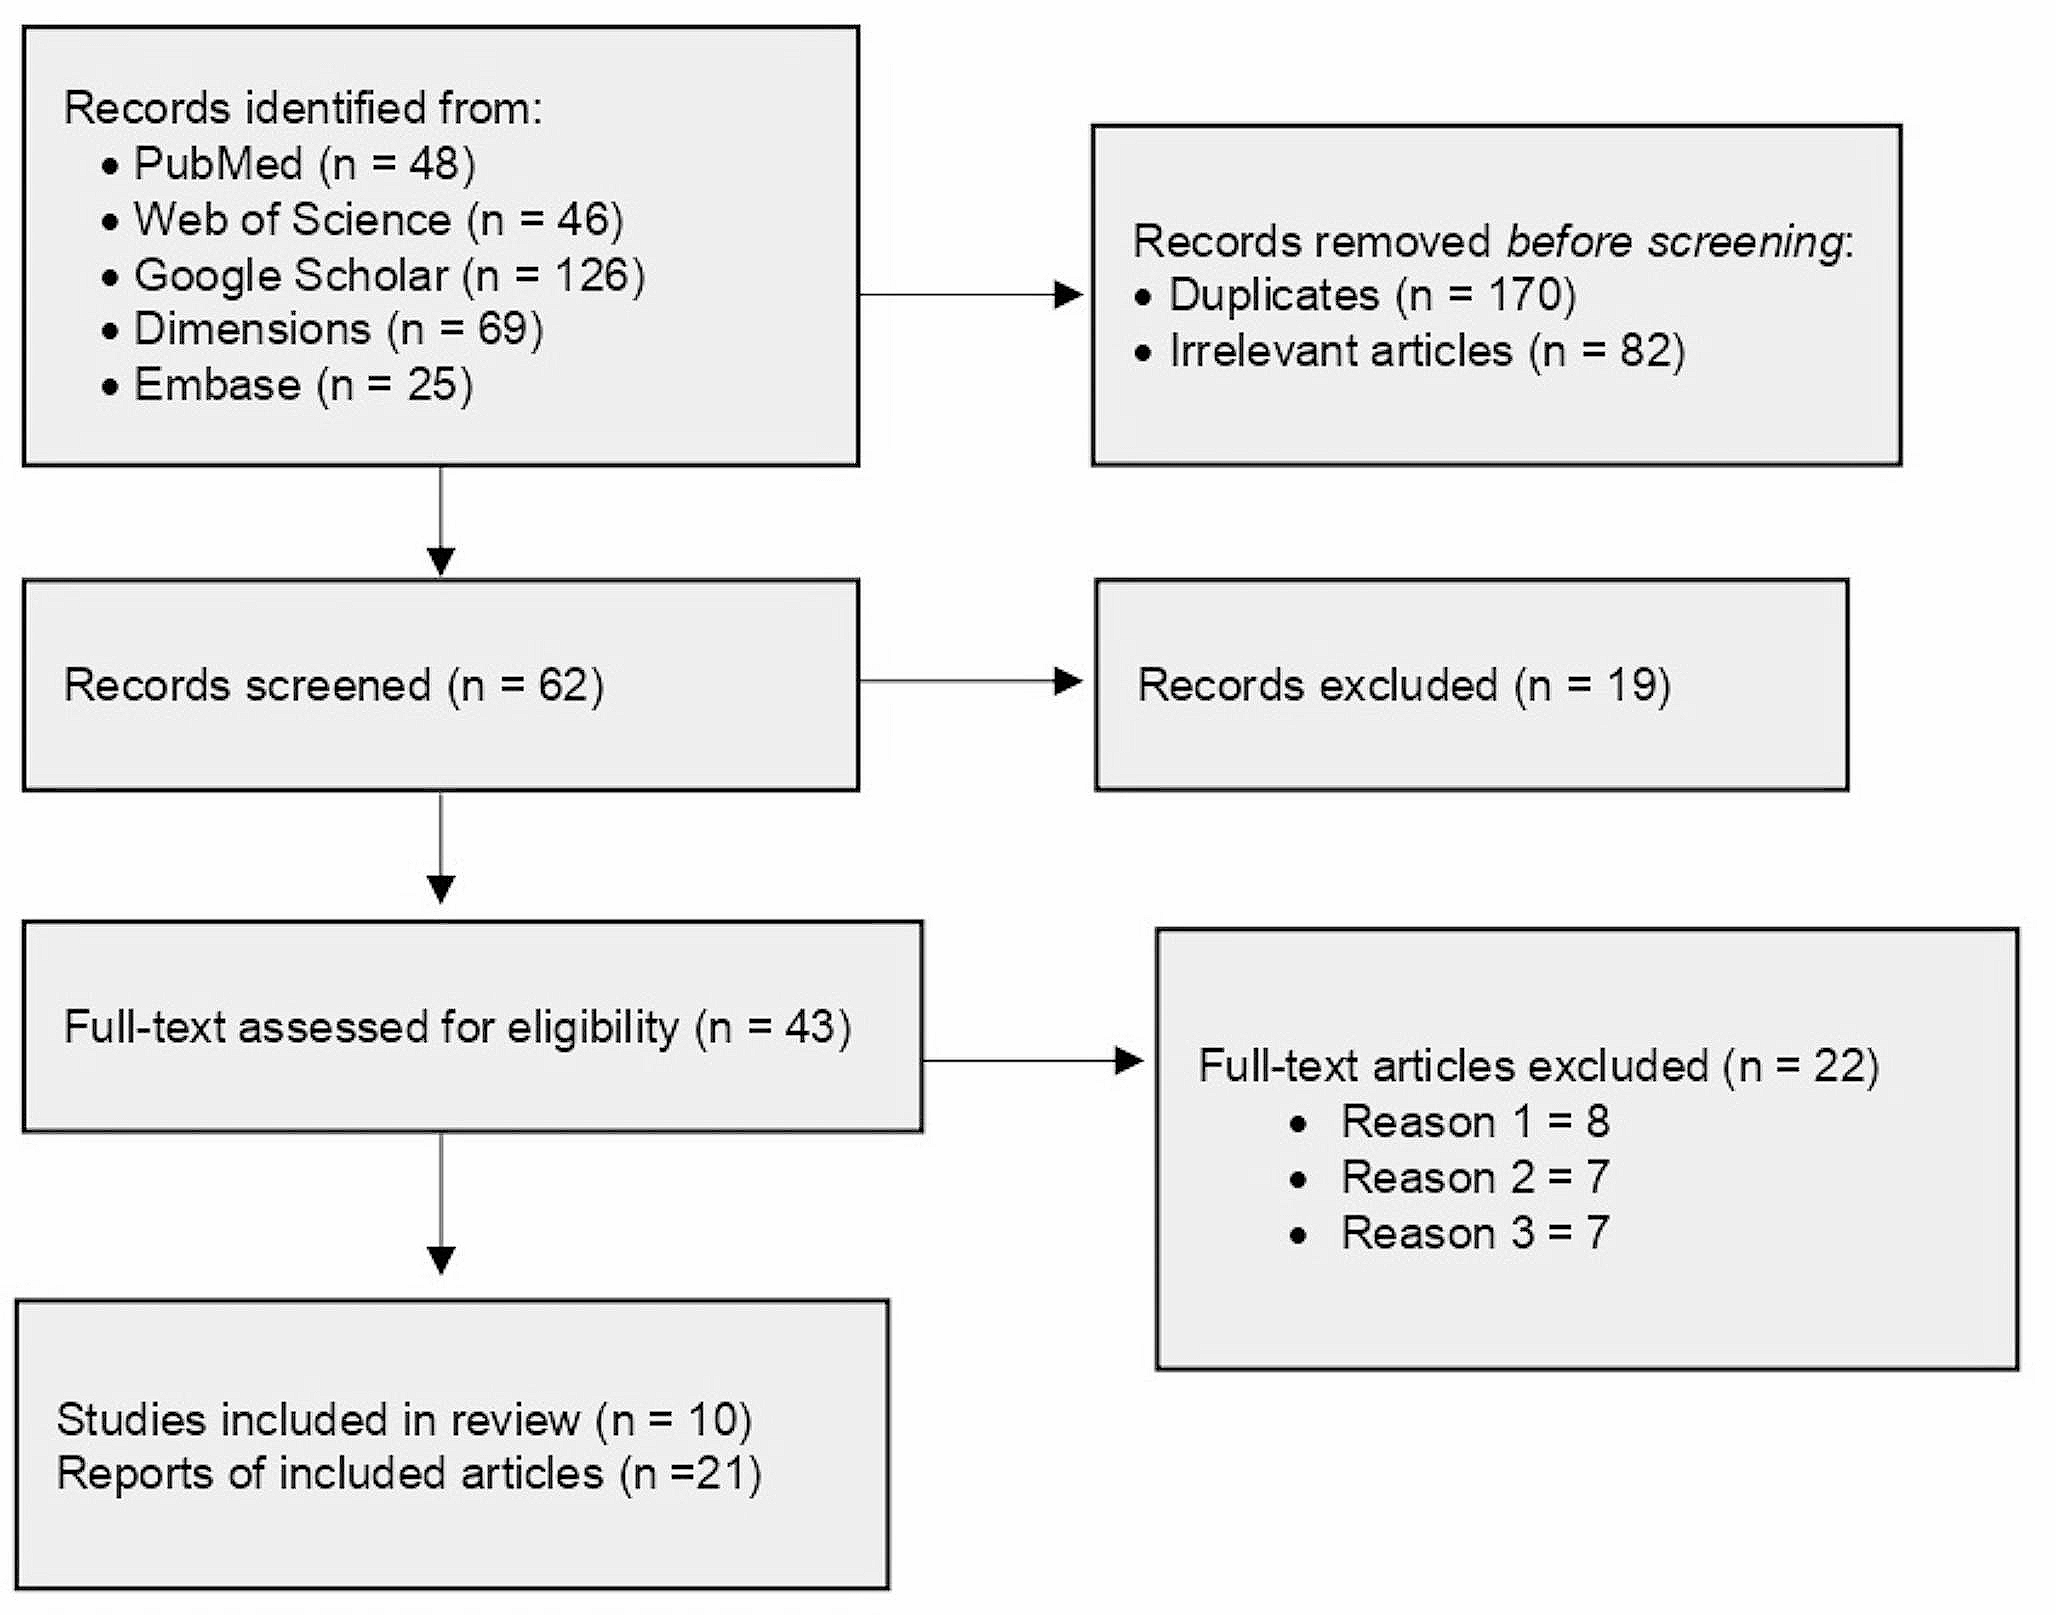 Postoperative nausea and vomiting in orthognathic surgery: systematic review and meta-analysis